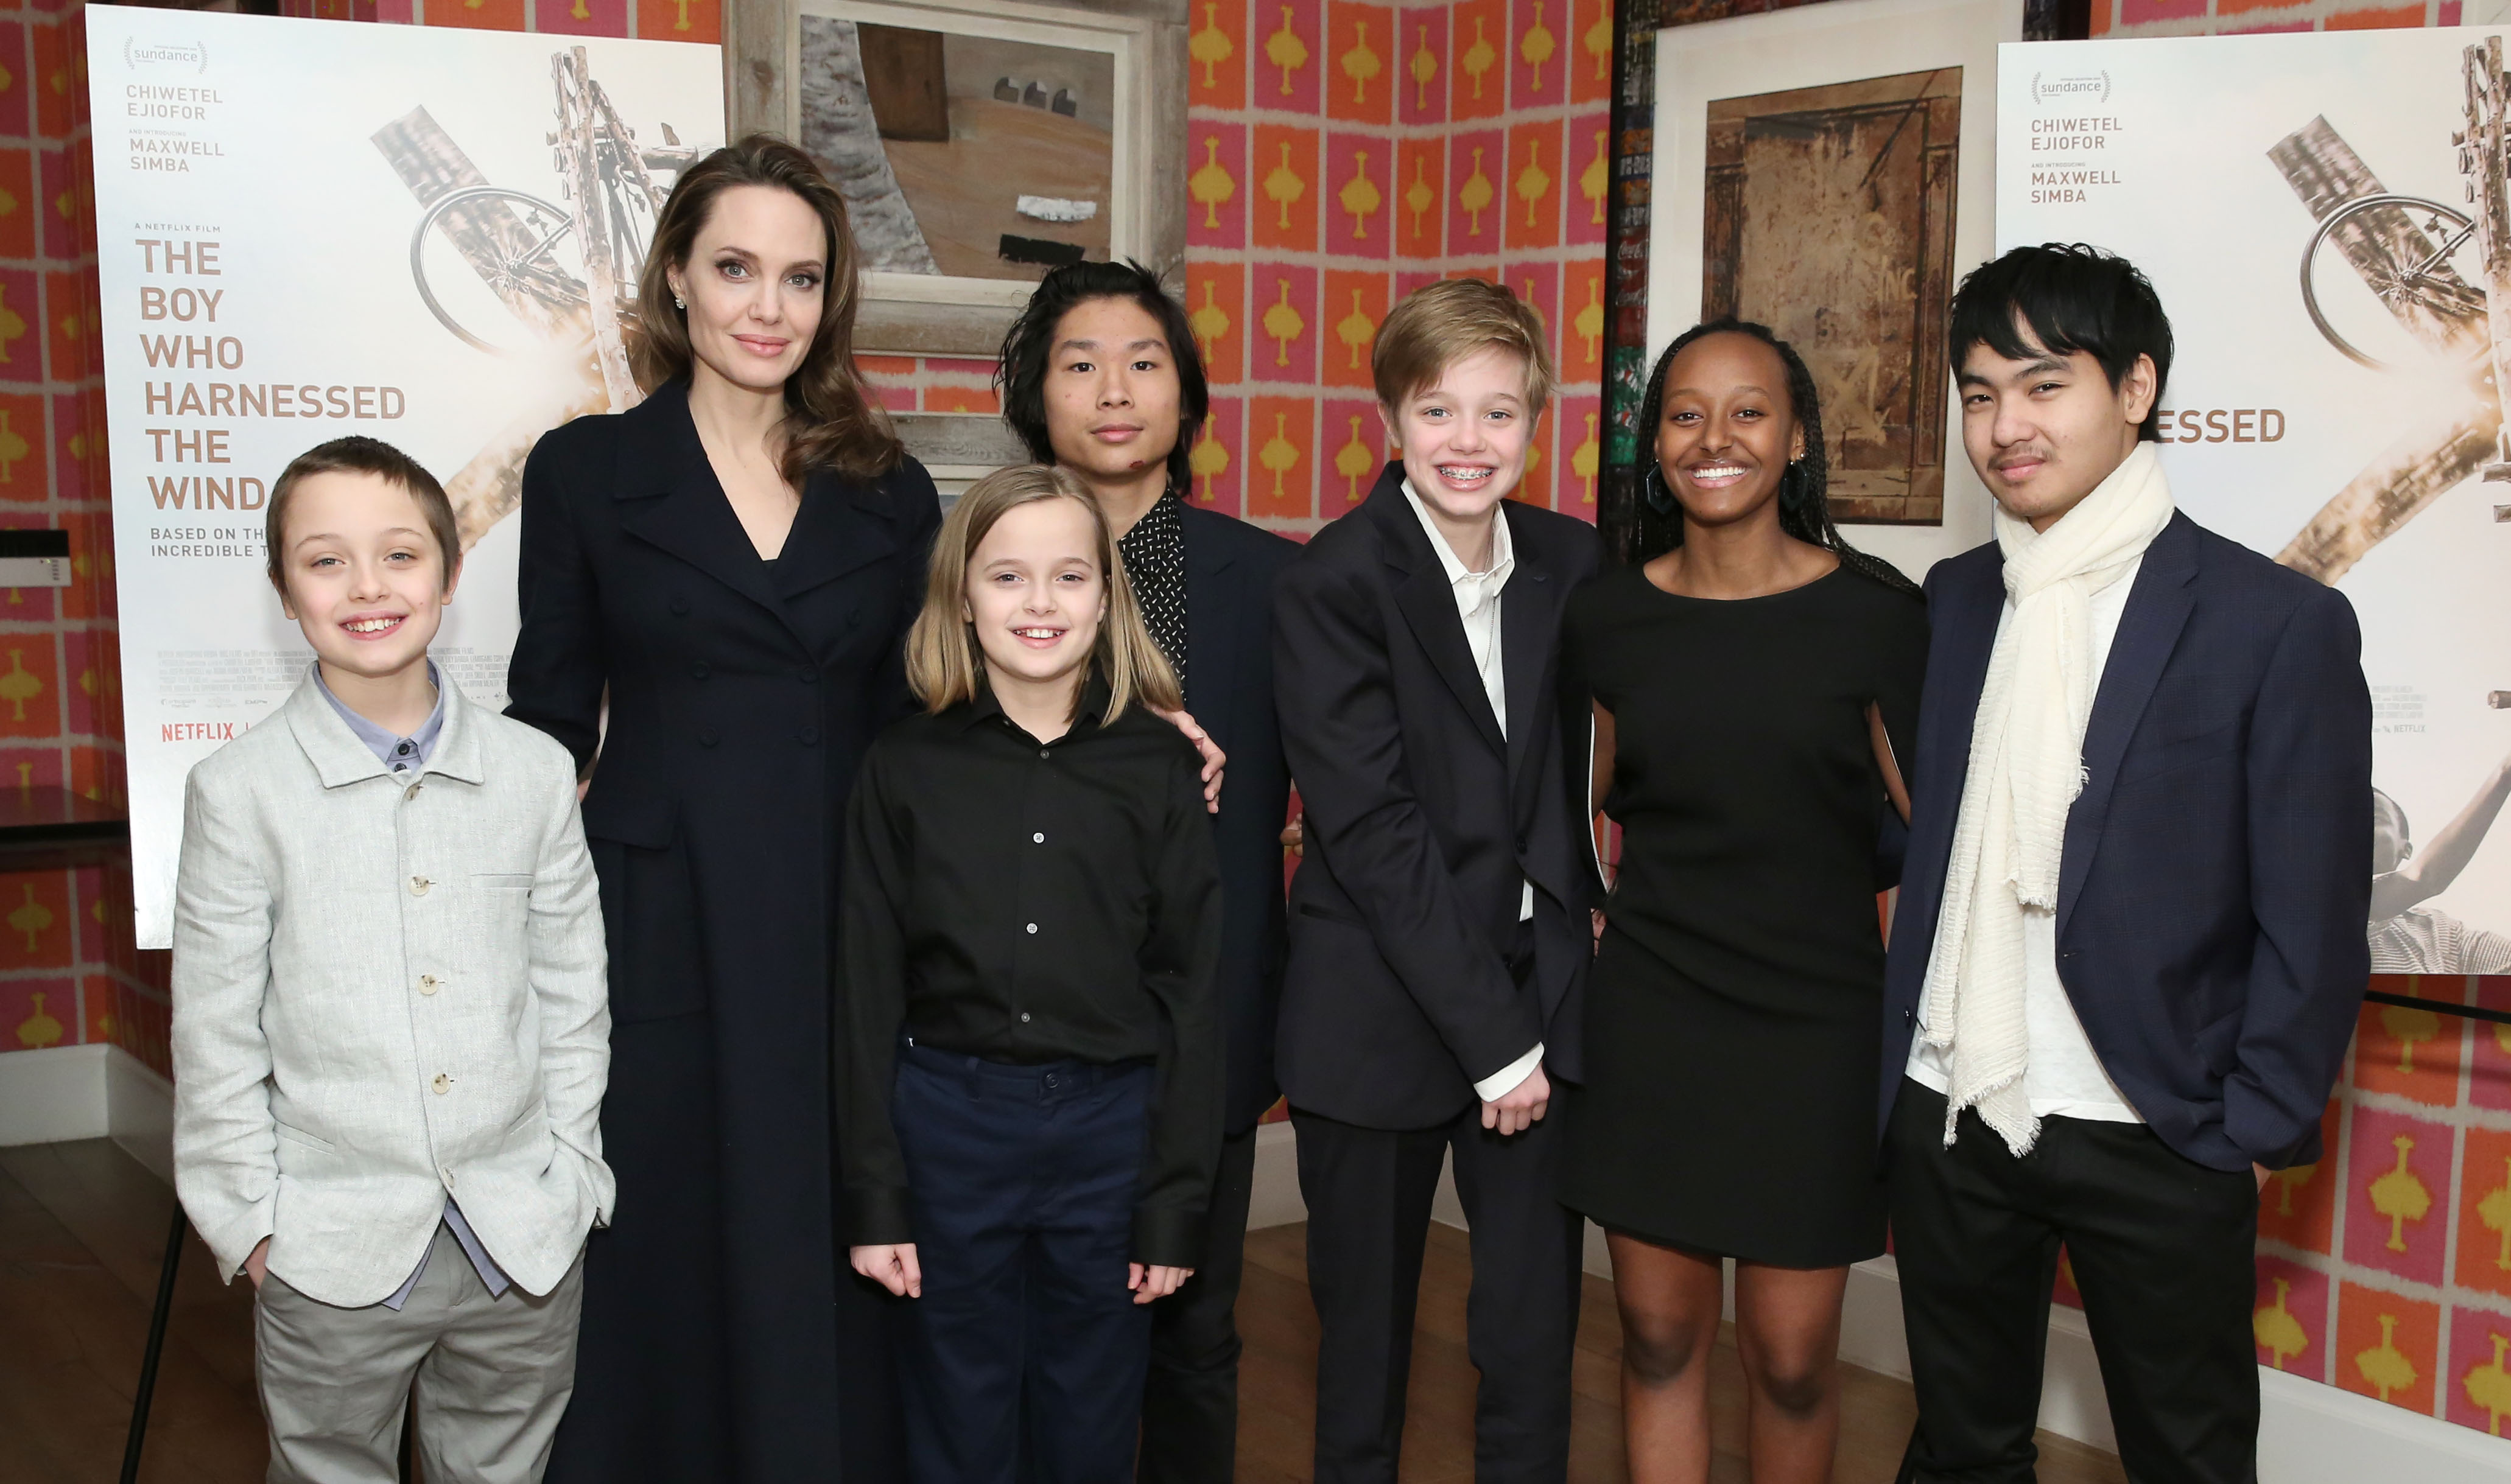 Angelina Jolie with Knox, Vivienne, Pax, Shiloh, Zahara, and Maddox Jolie-Pitt attend "The Boy Who Harnessed The Wind" Special Screening at Crosby Street Hotel in New York City, on February 25, 2019. | Source: Getty Images